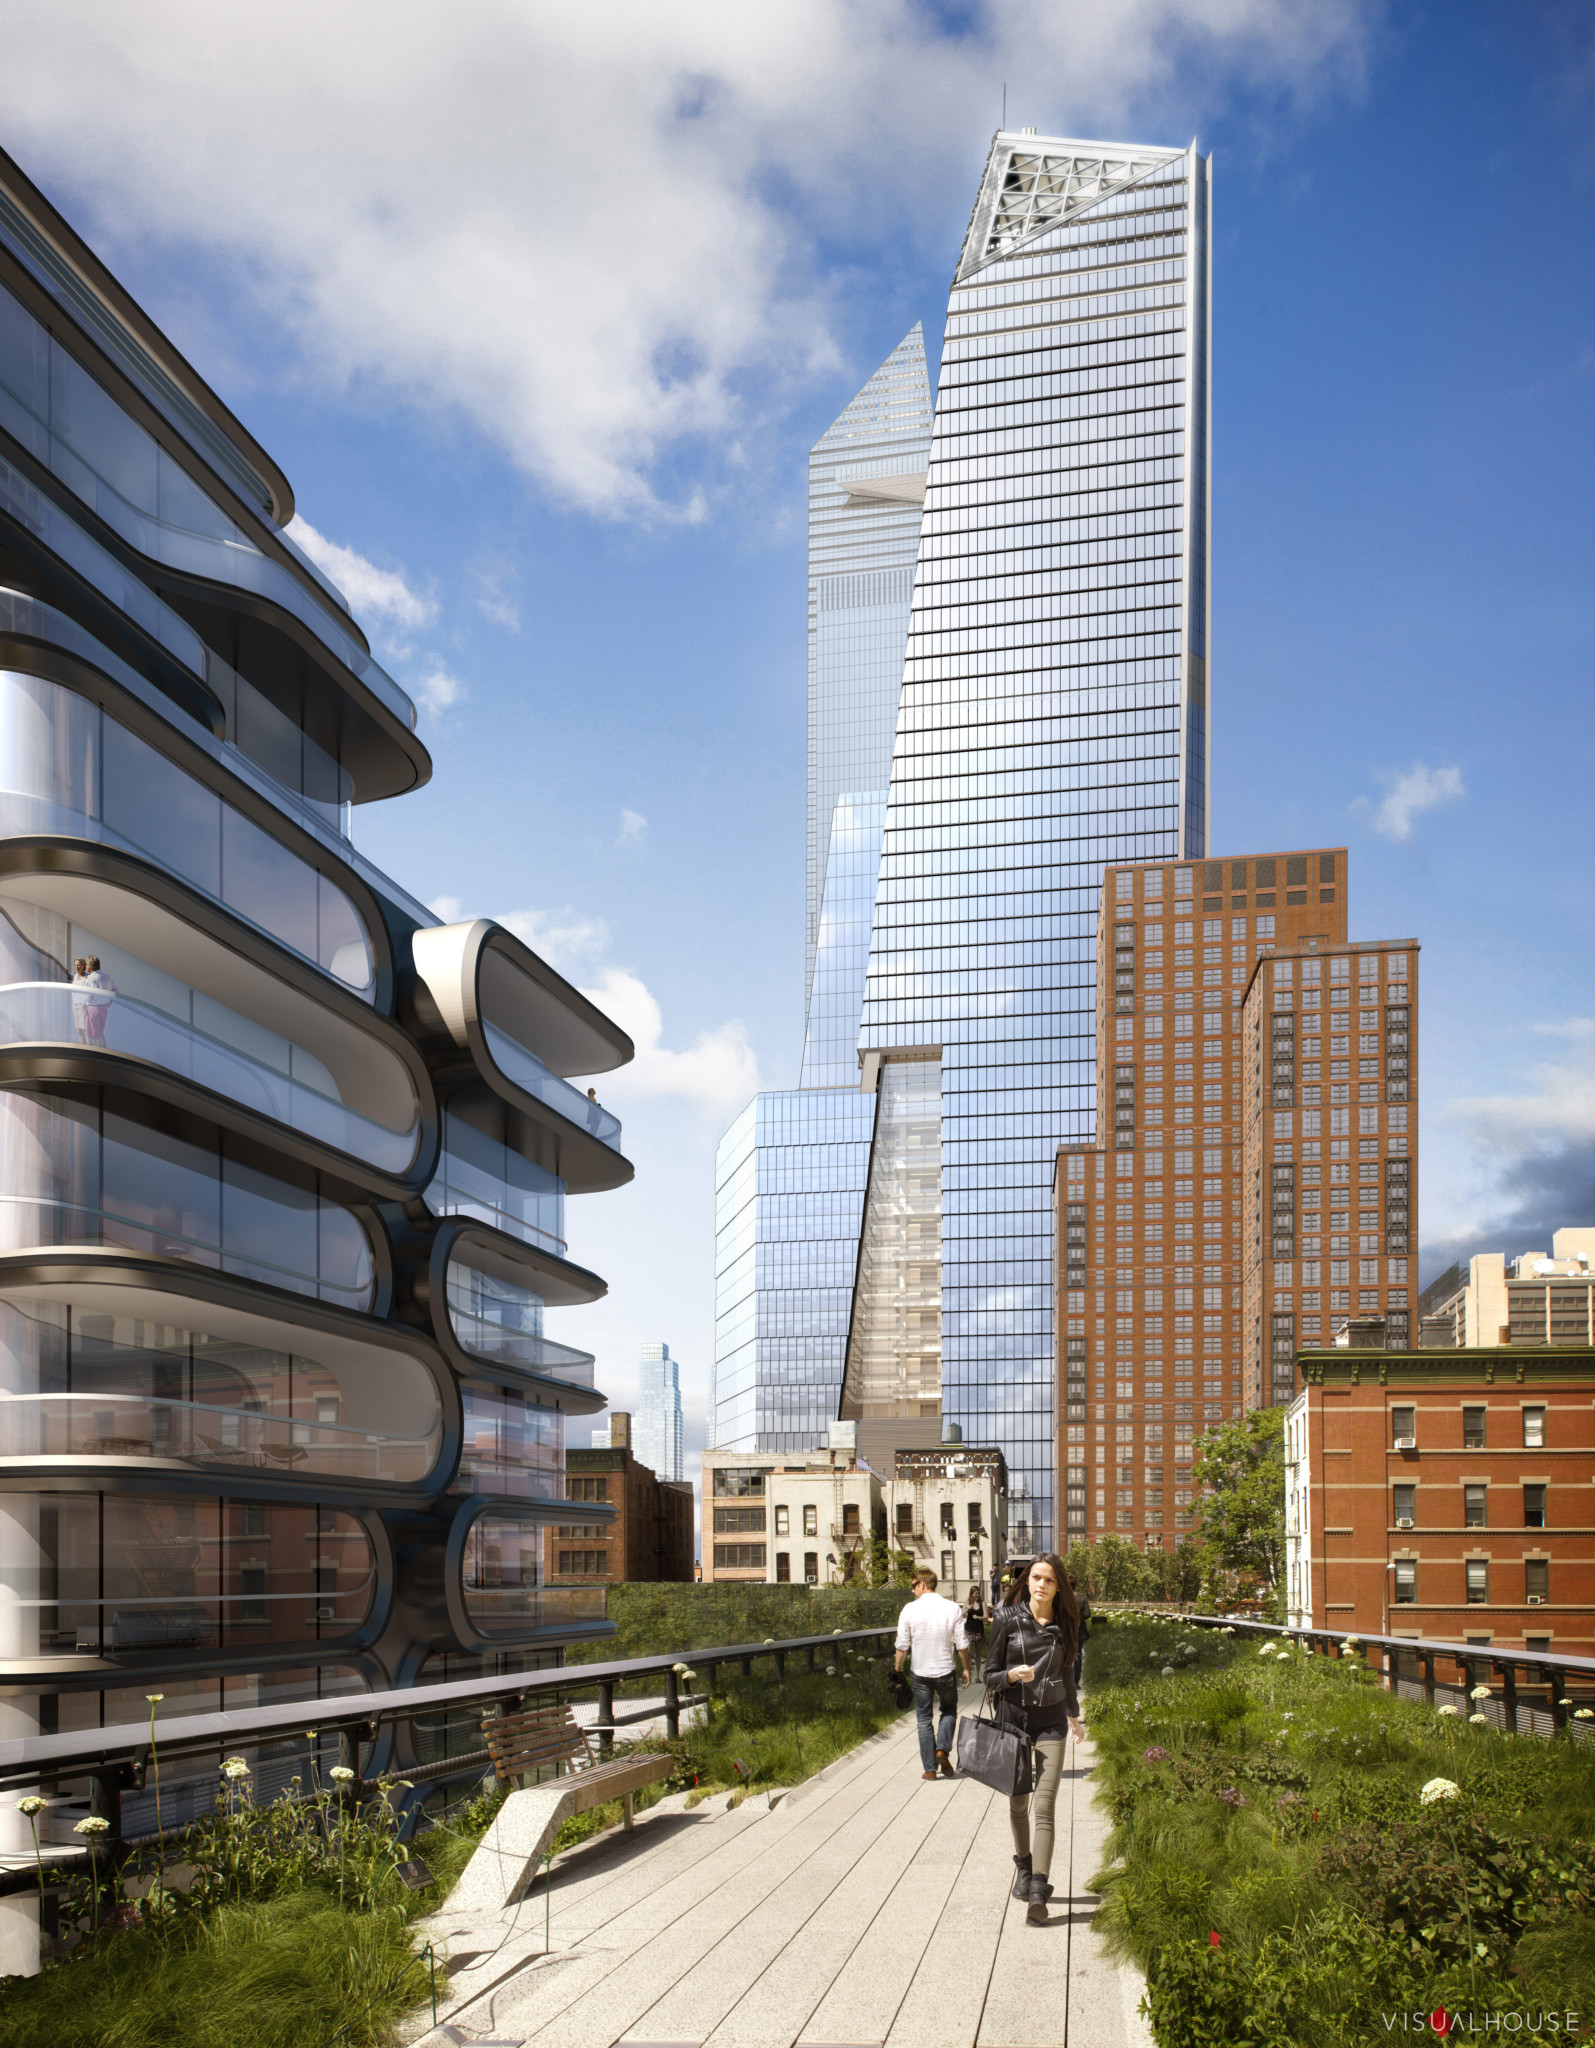 An artist's impression of how hudson yards will look.